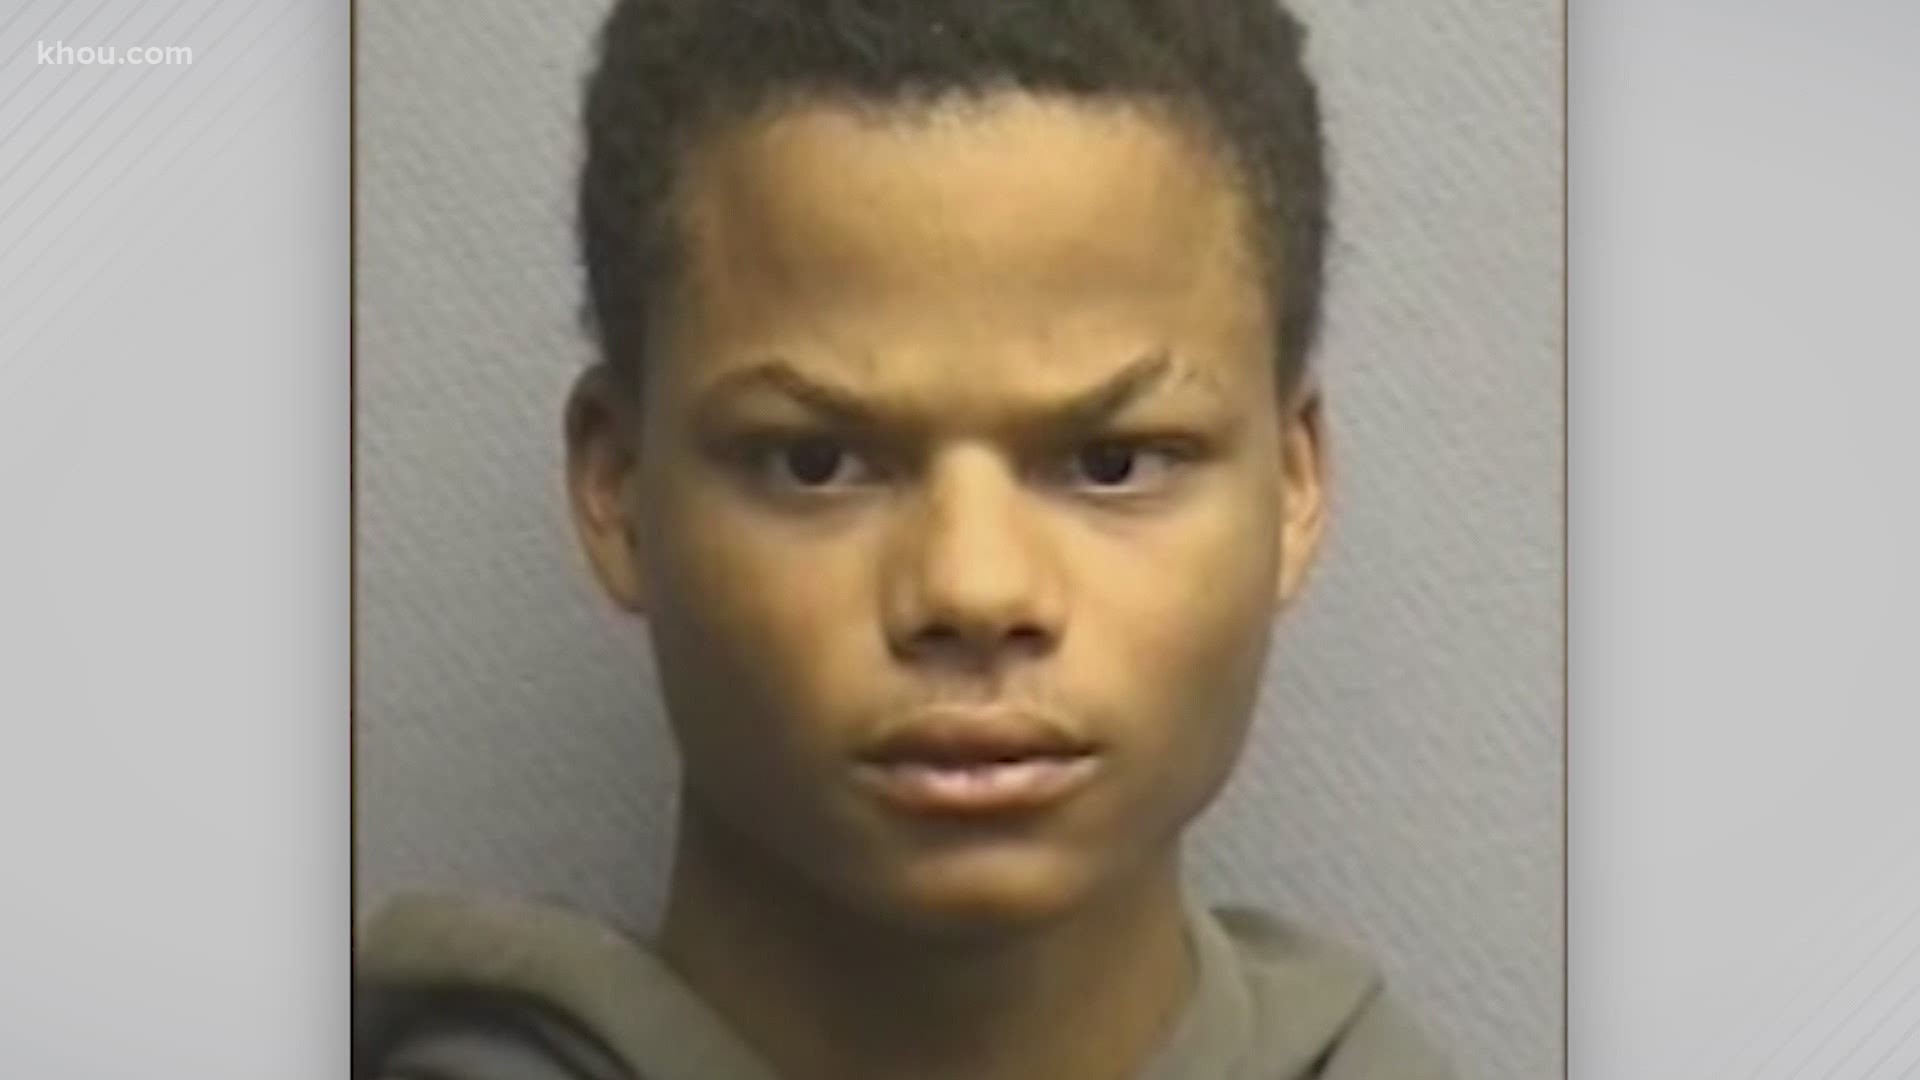 Edward O’Neal Jr. was out on a $25,000 bond for the stabbing death of a Houston teen and now he's charged with another murder four years later.